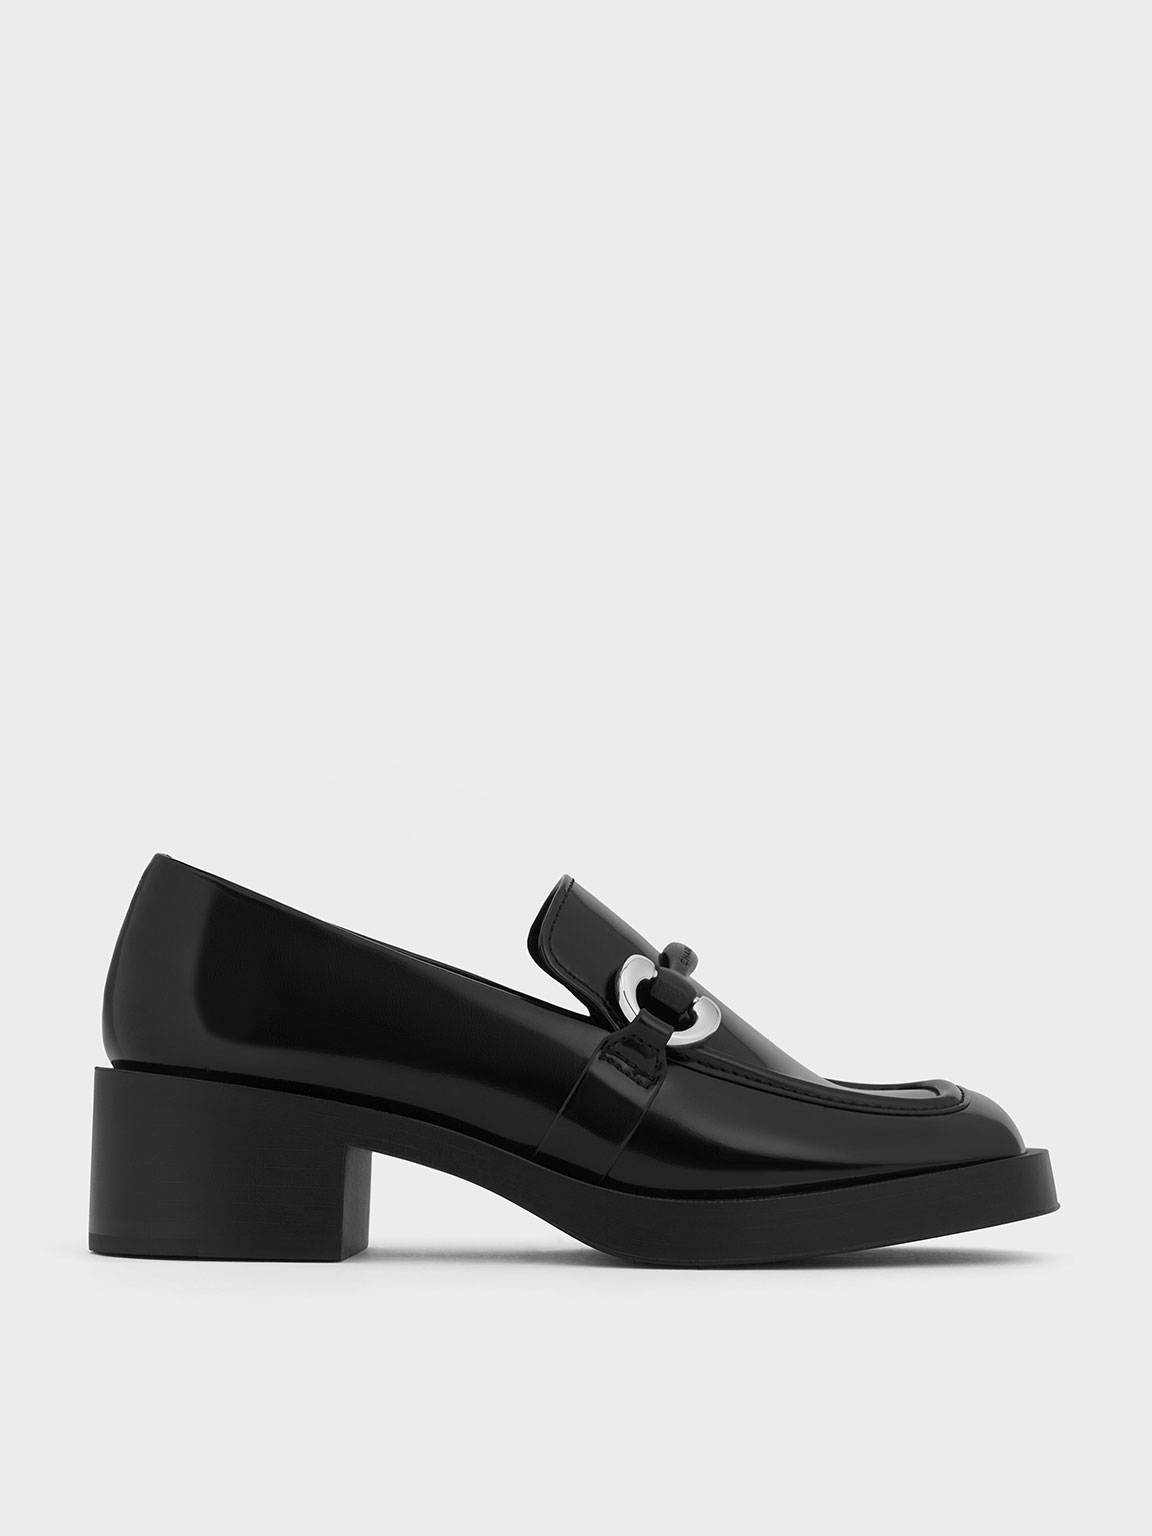 Black Boxed Catelaya Metallic Accent Loafer Pumps - CHARLES & KEITH SG